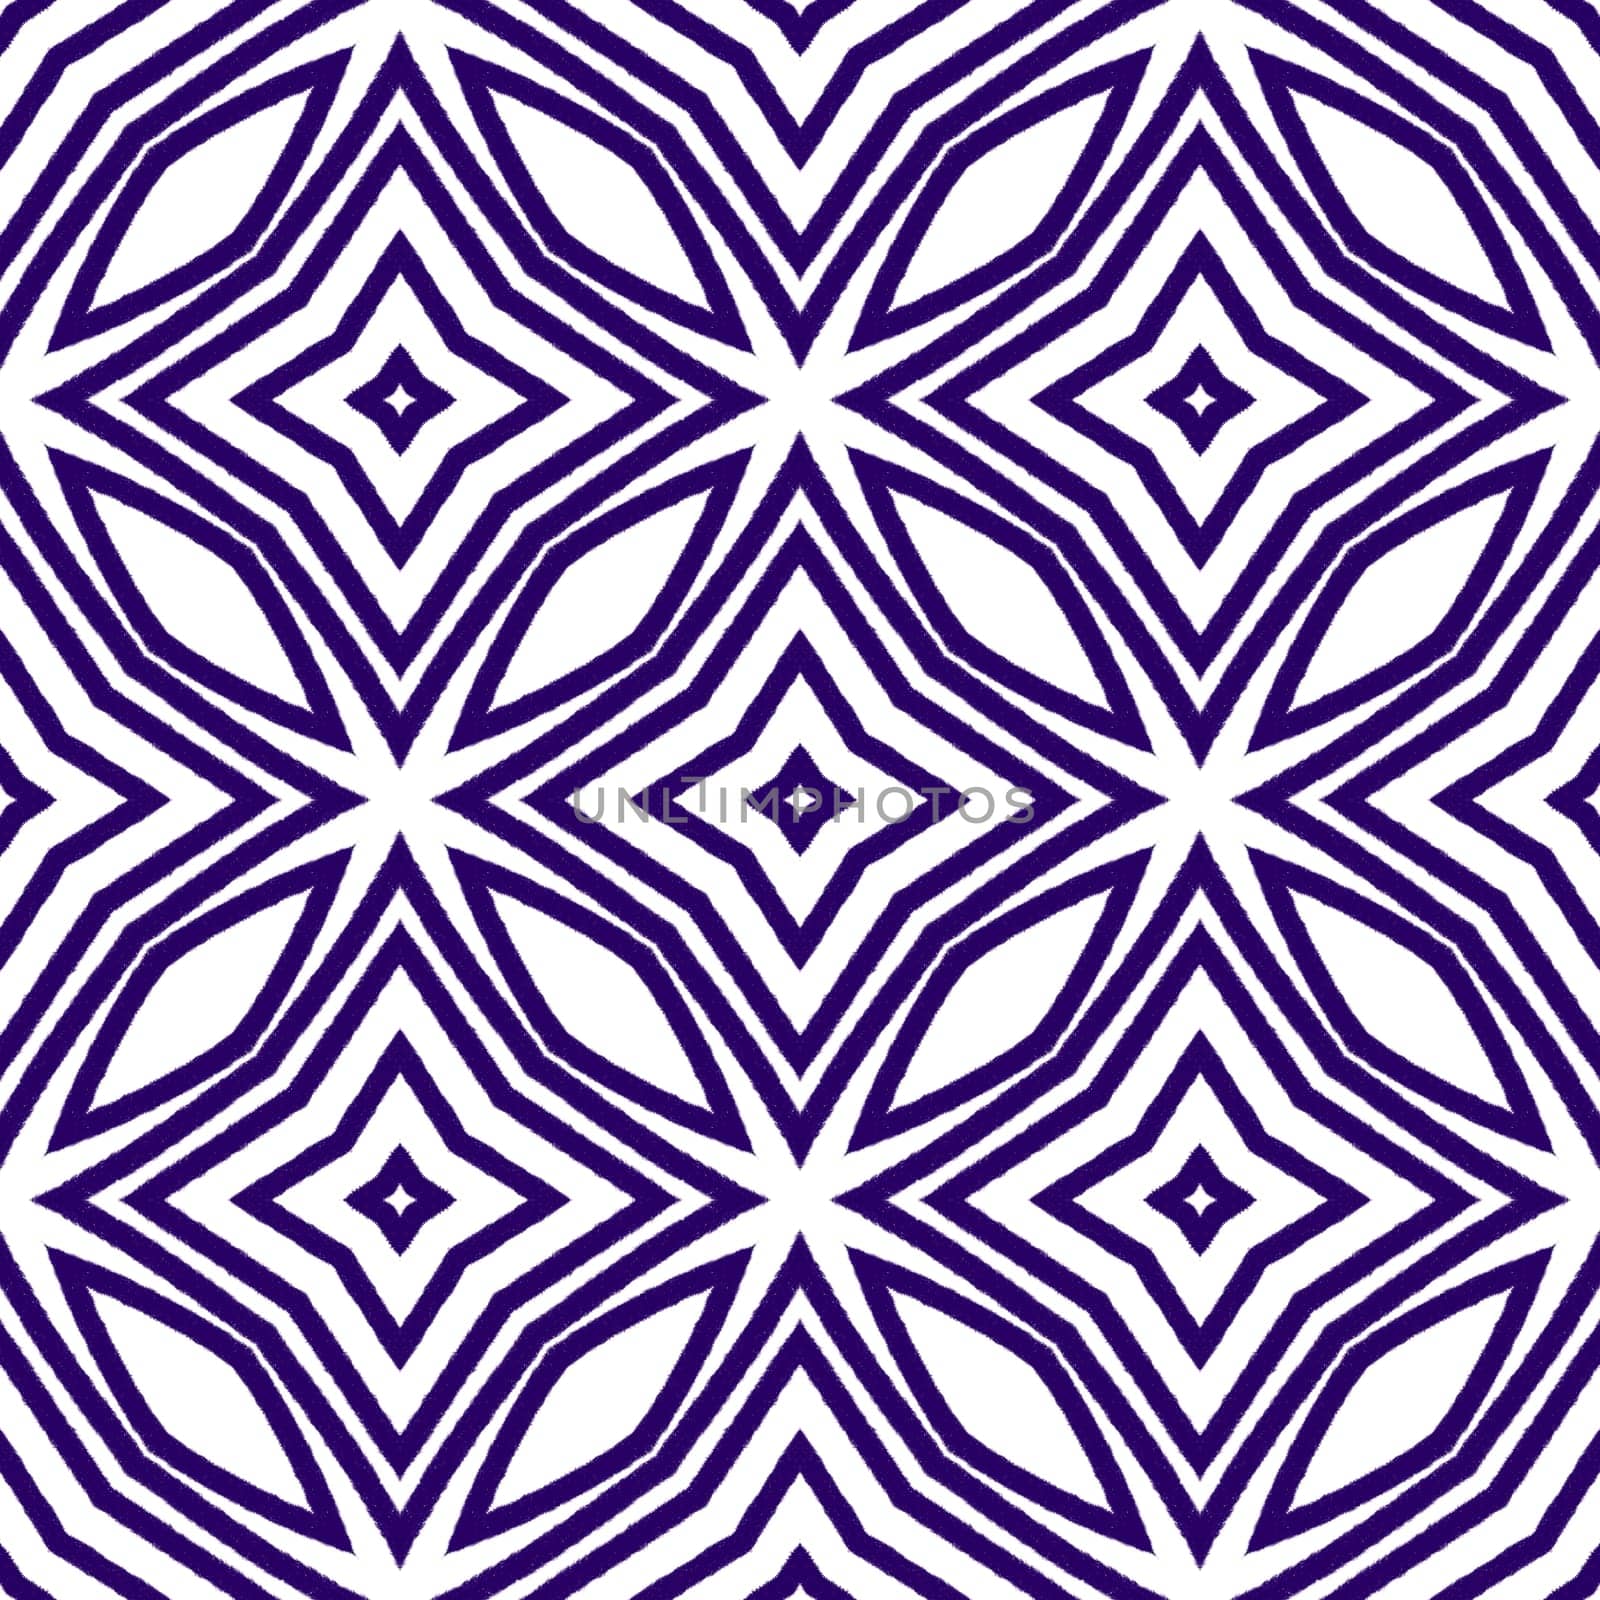 Ethnic hand painted pattern. Purple symmetrical kaleidoscope background. Summer dress ethnic hand painted tile. Textile ready fine print, swimwear fabric, wallpaper, wrapping.